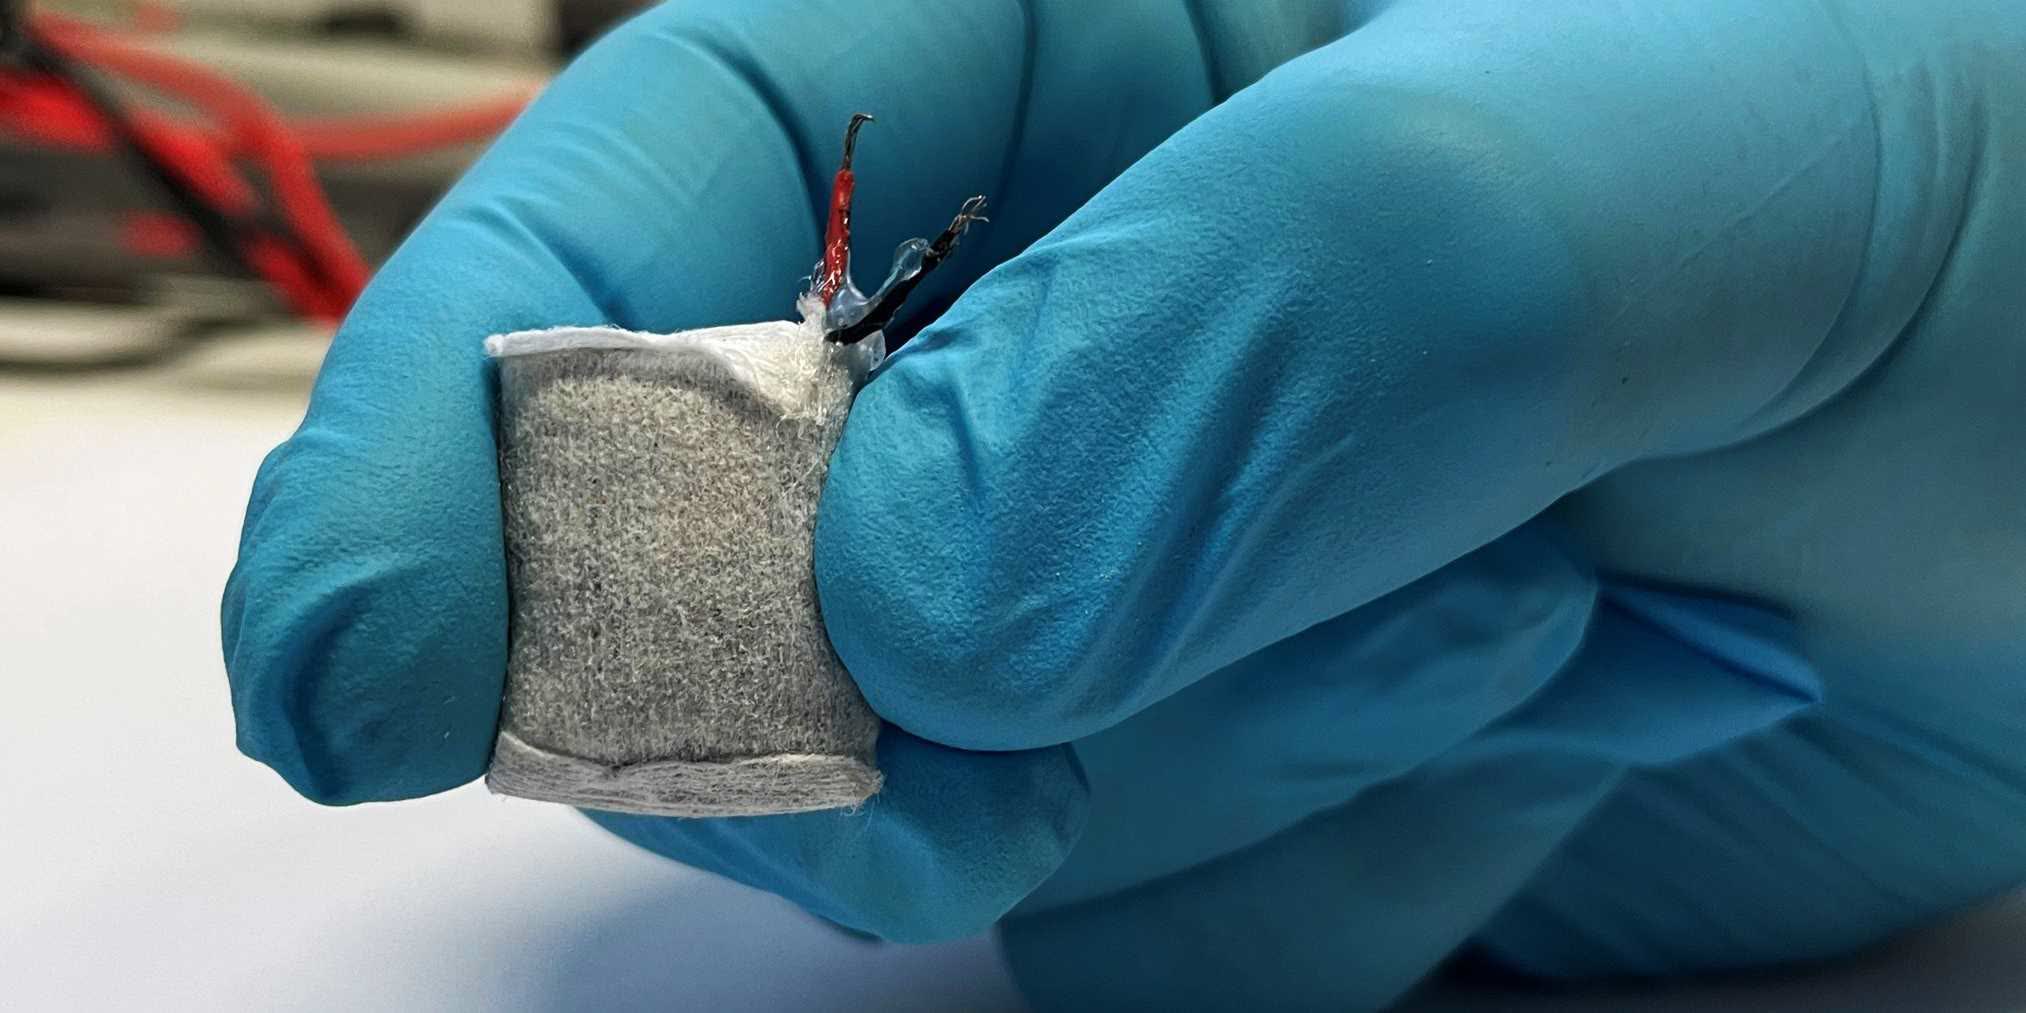 Fuel cell implant uses blood sugar to manage type 1 diabetes